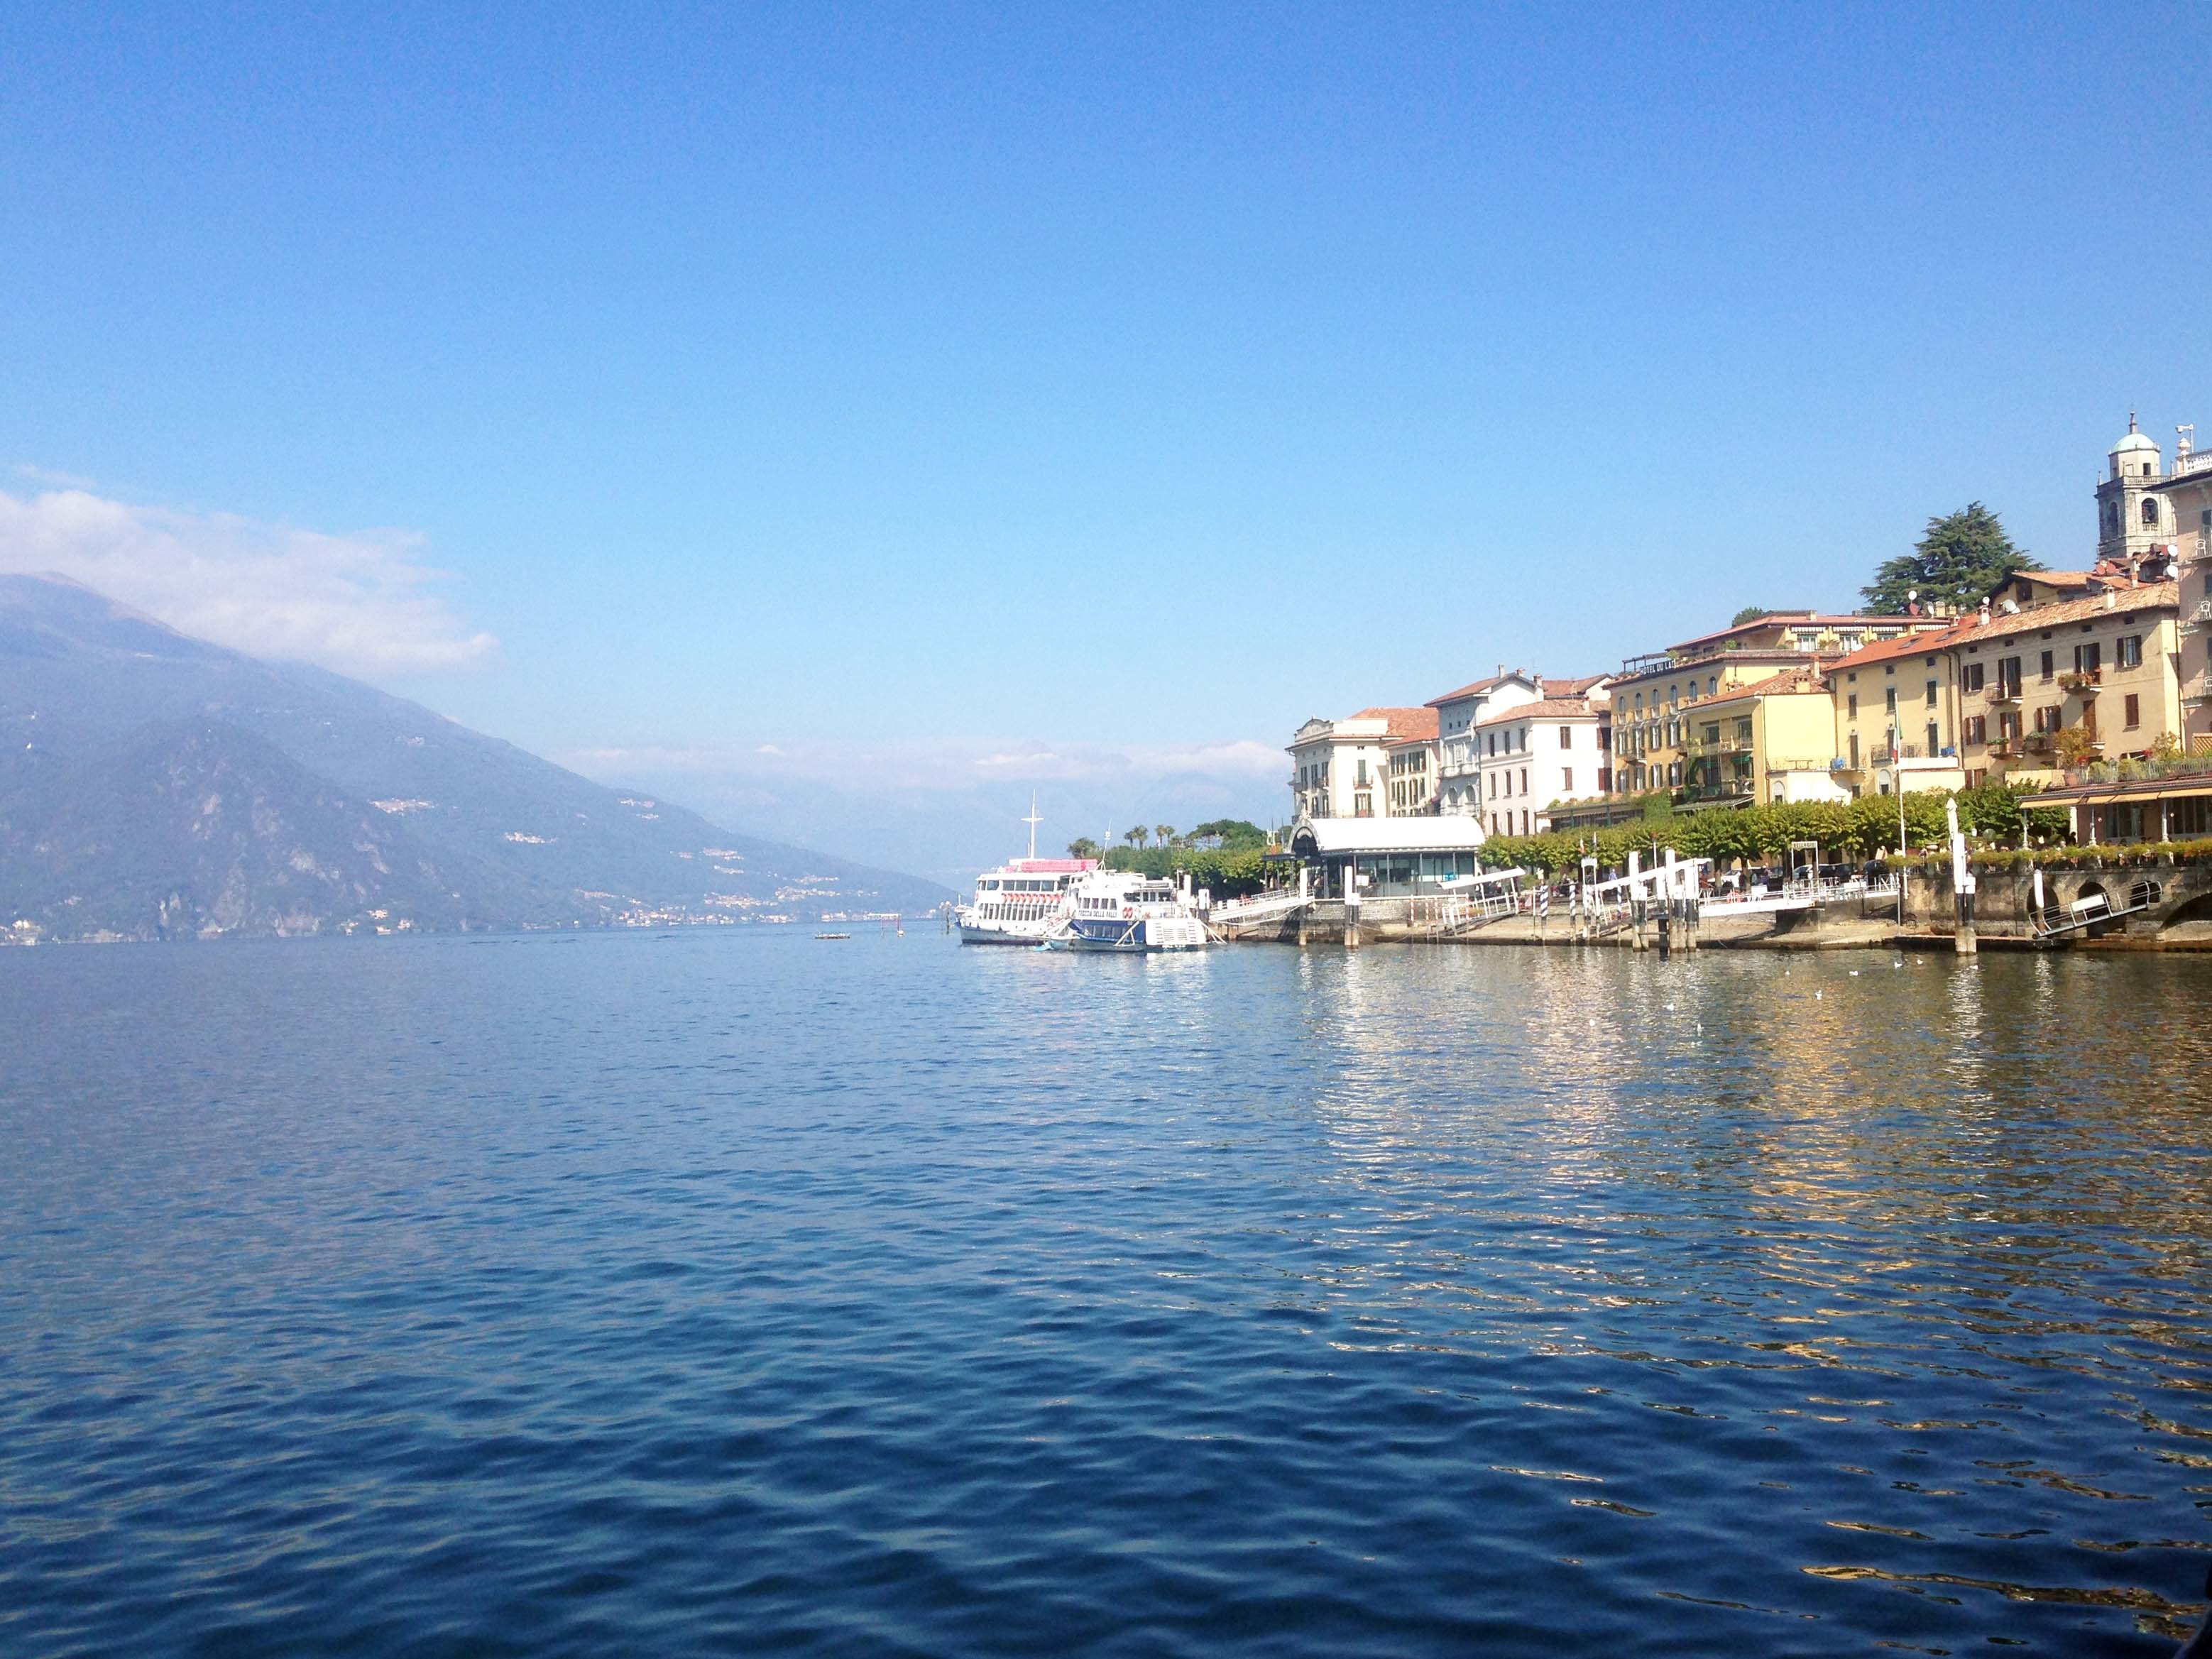 A view of the beautiful blue waters and picturesque buildings on Lake Como, Italy.